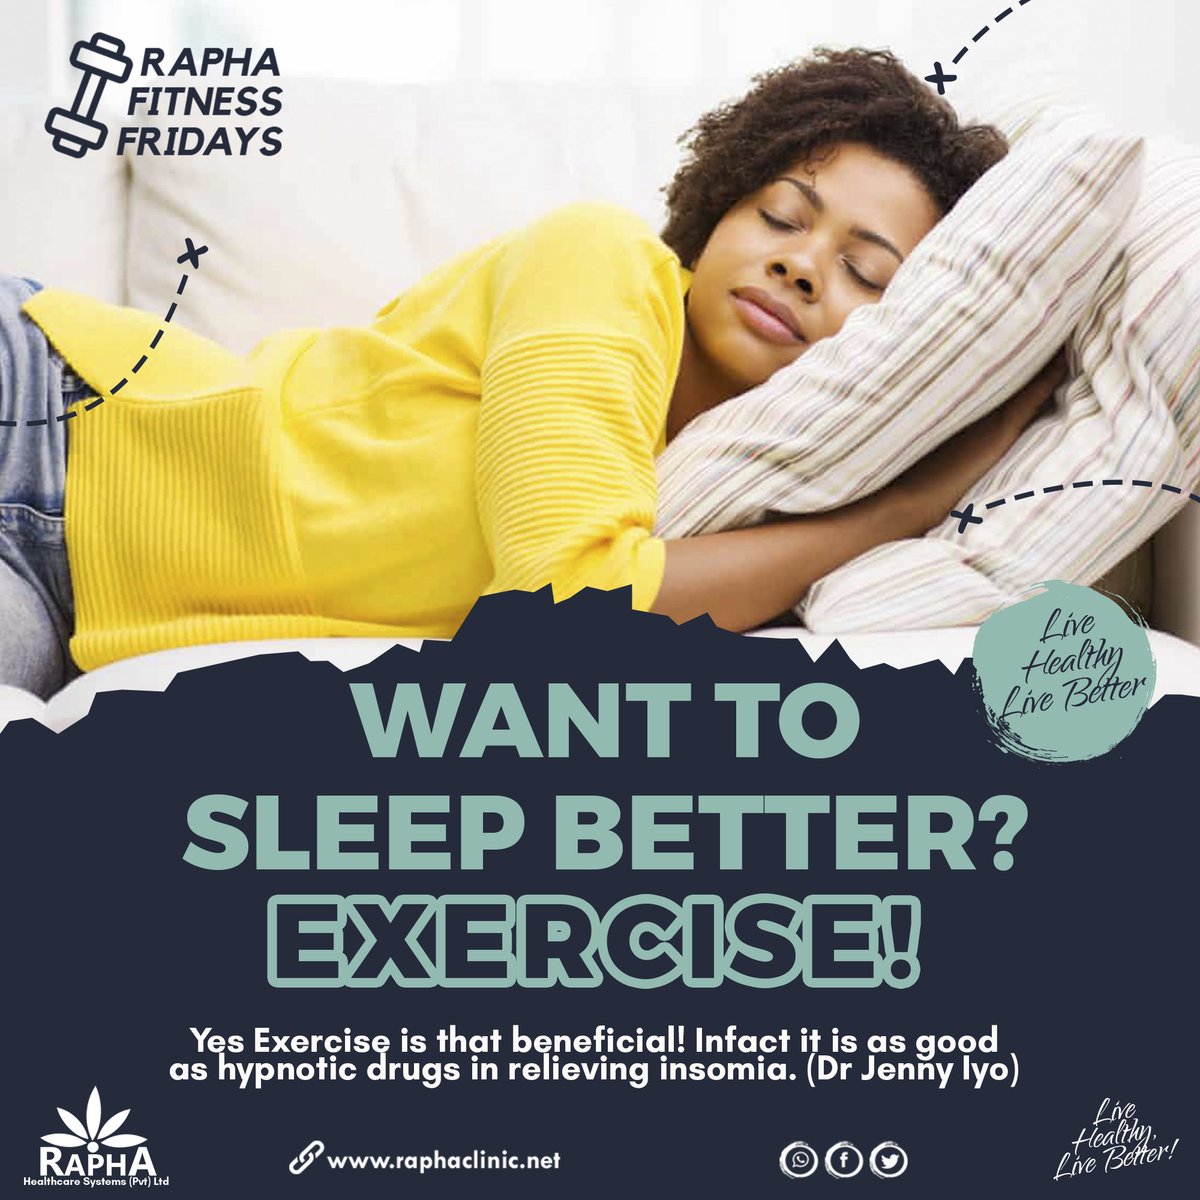 Friday: Exercise has massive benefits. Here is one that you will get with immediate effect! #FitnessFriday #friyay #FridayFeeling #FridayMotivation #FitnessMotivation #Goals #BodyGoals #Exercise #Sleep #RaphaCares